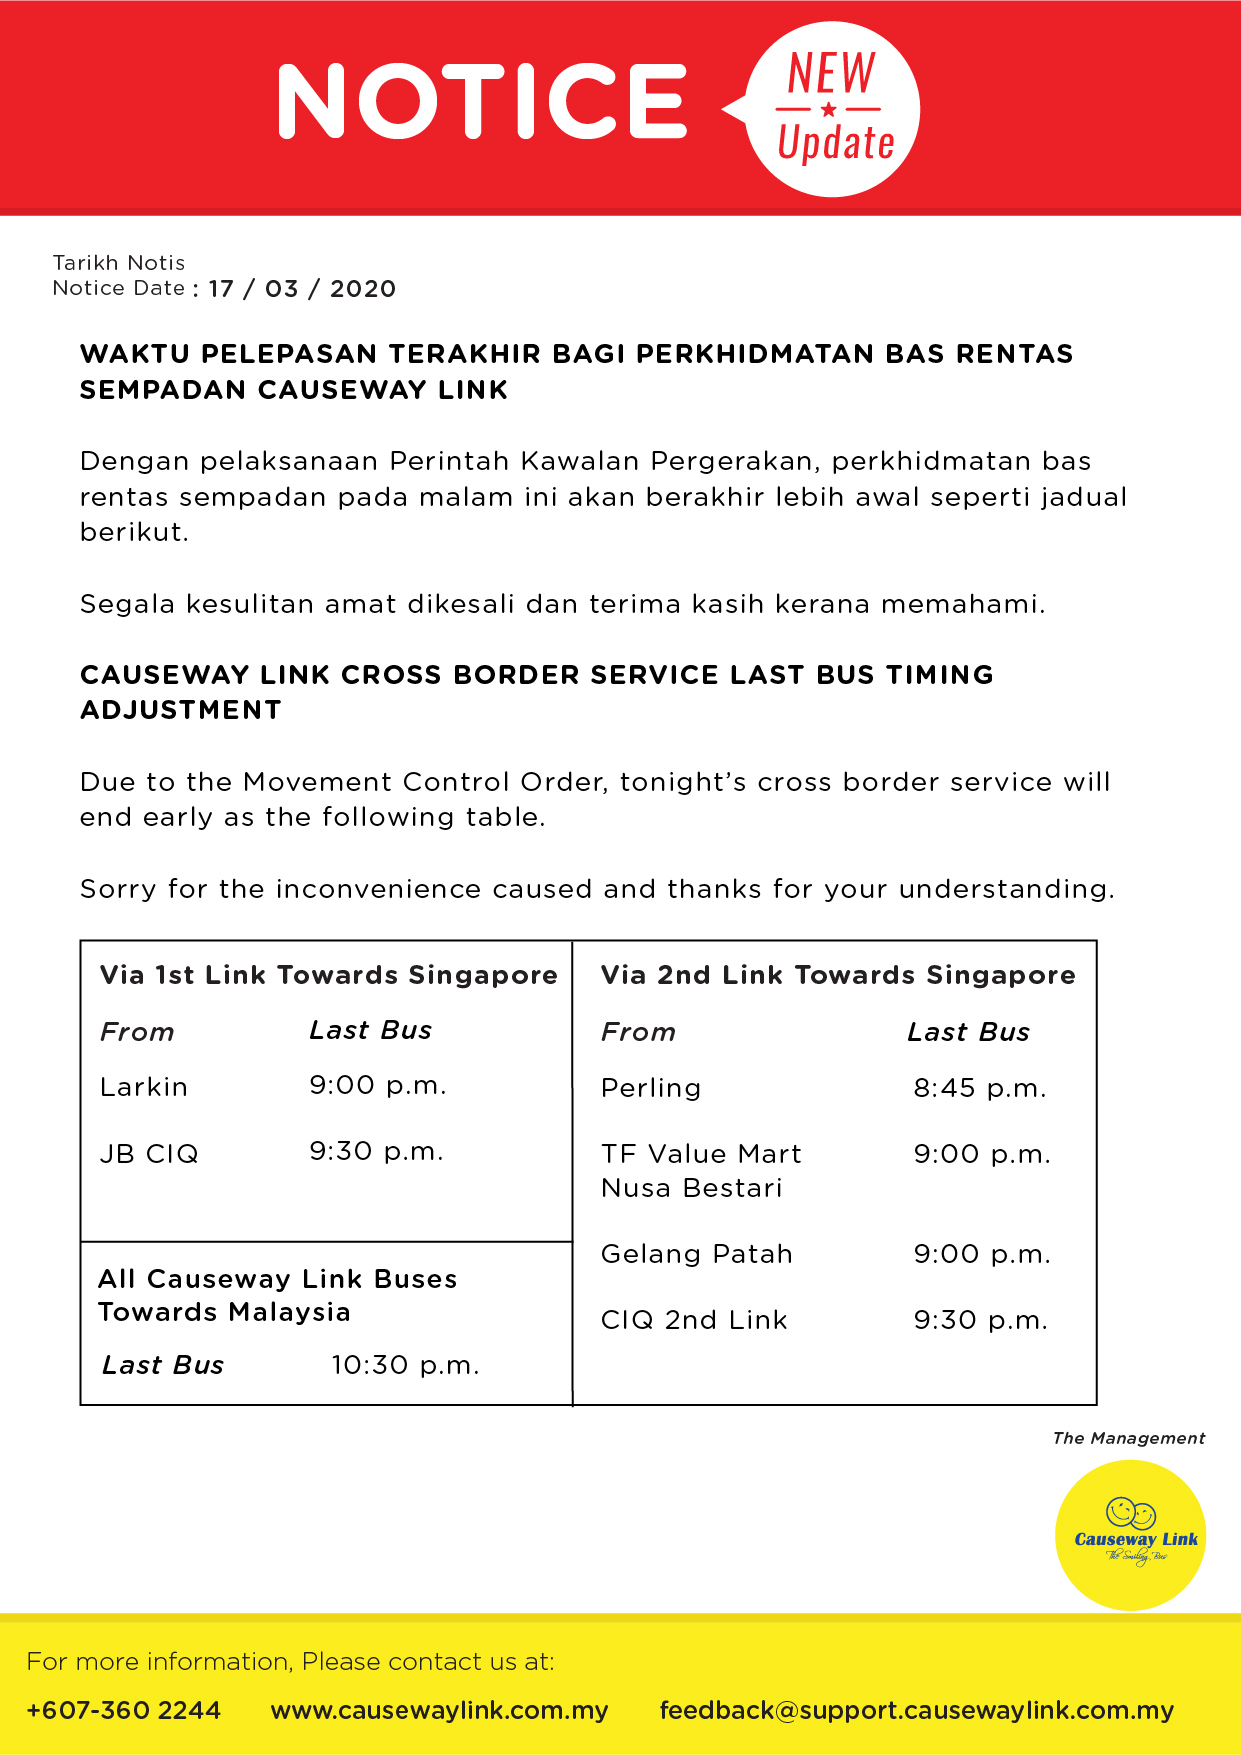 Early last buses for Causeway Link bus services on 17 March 2020